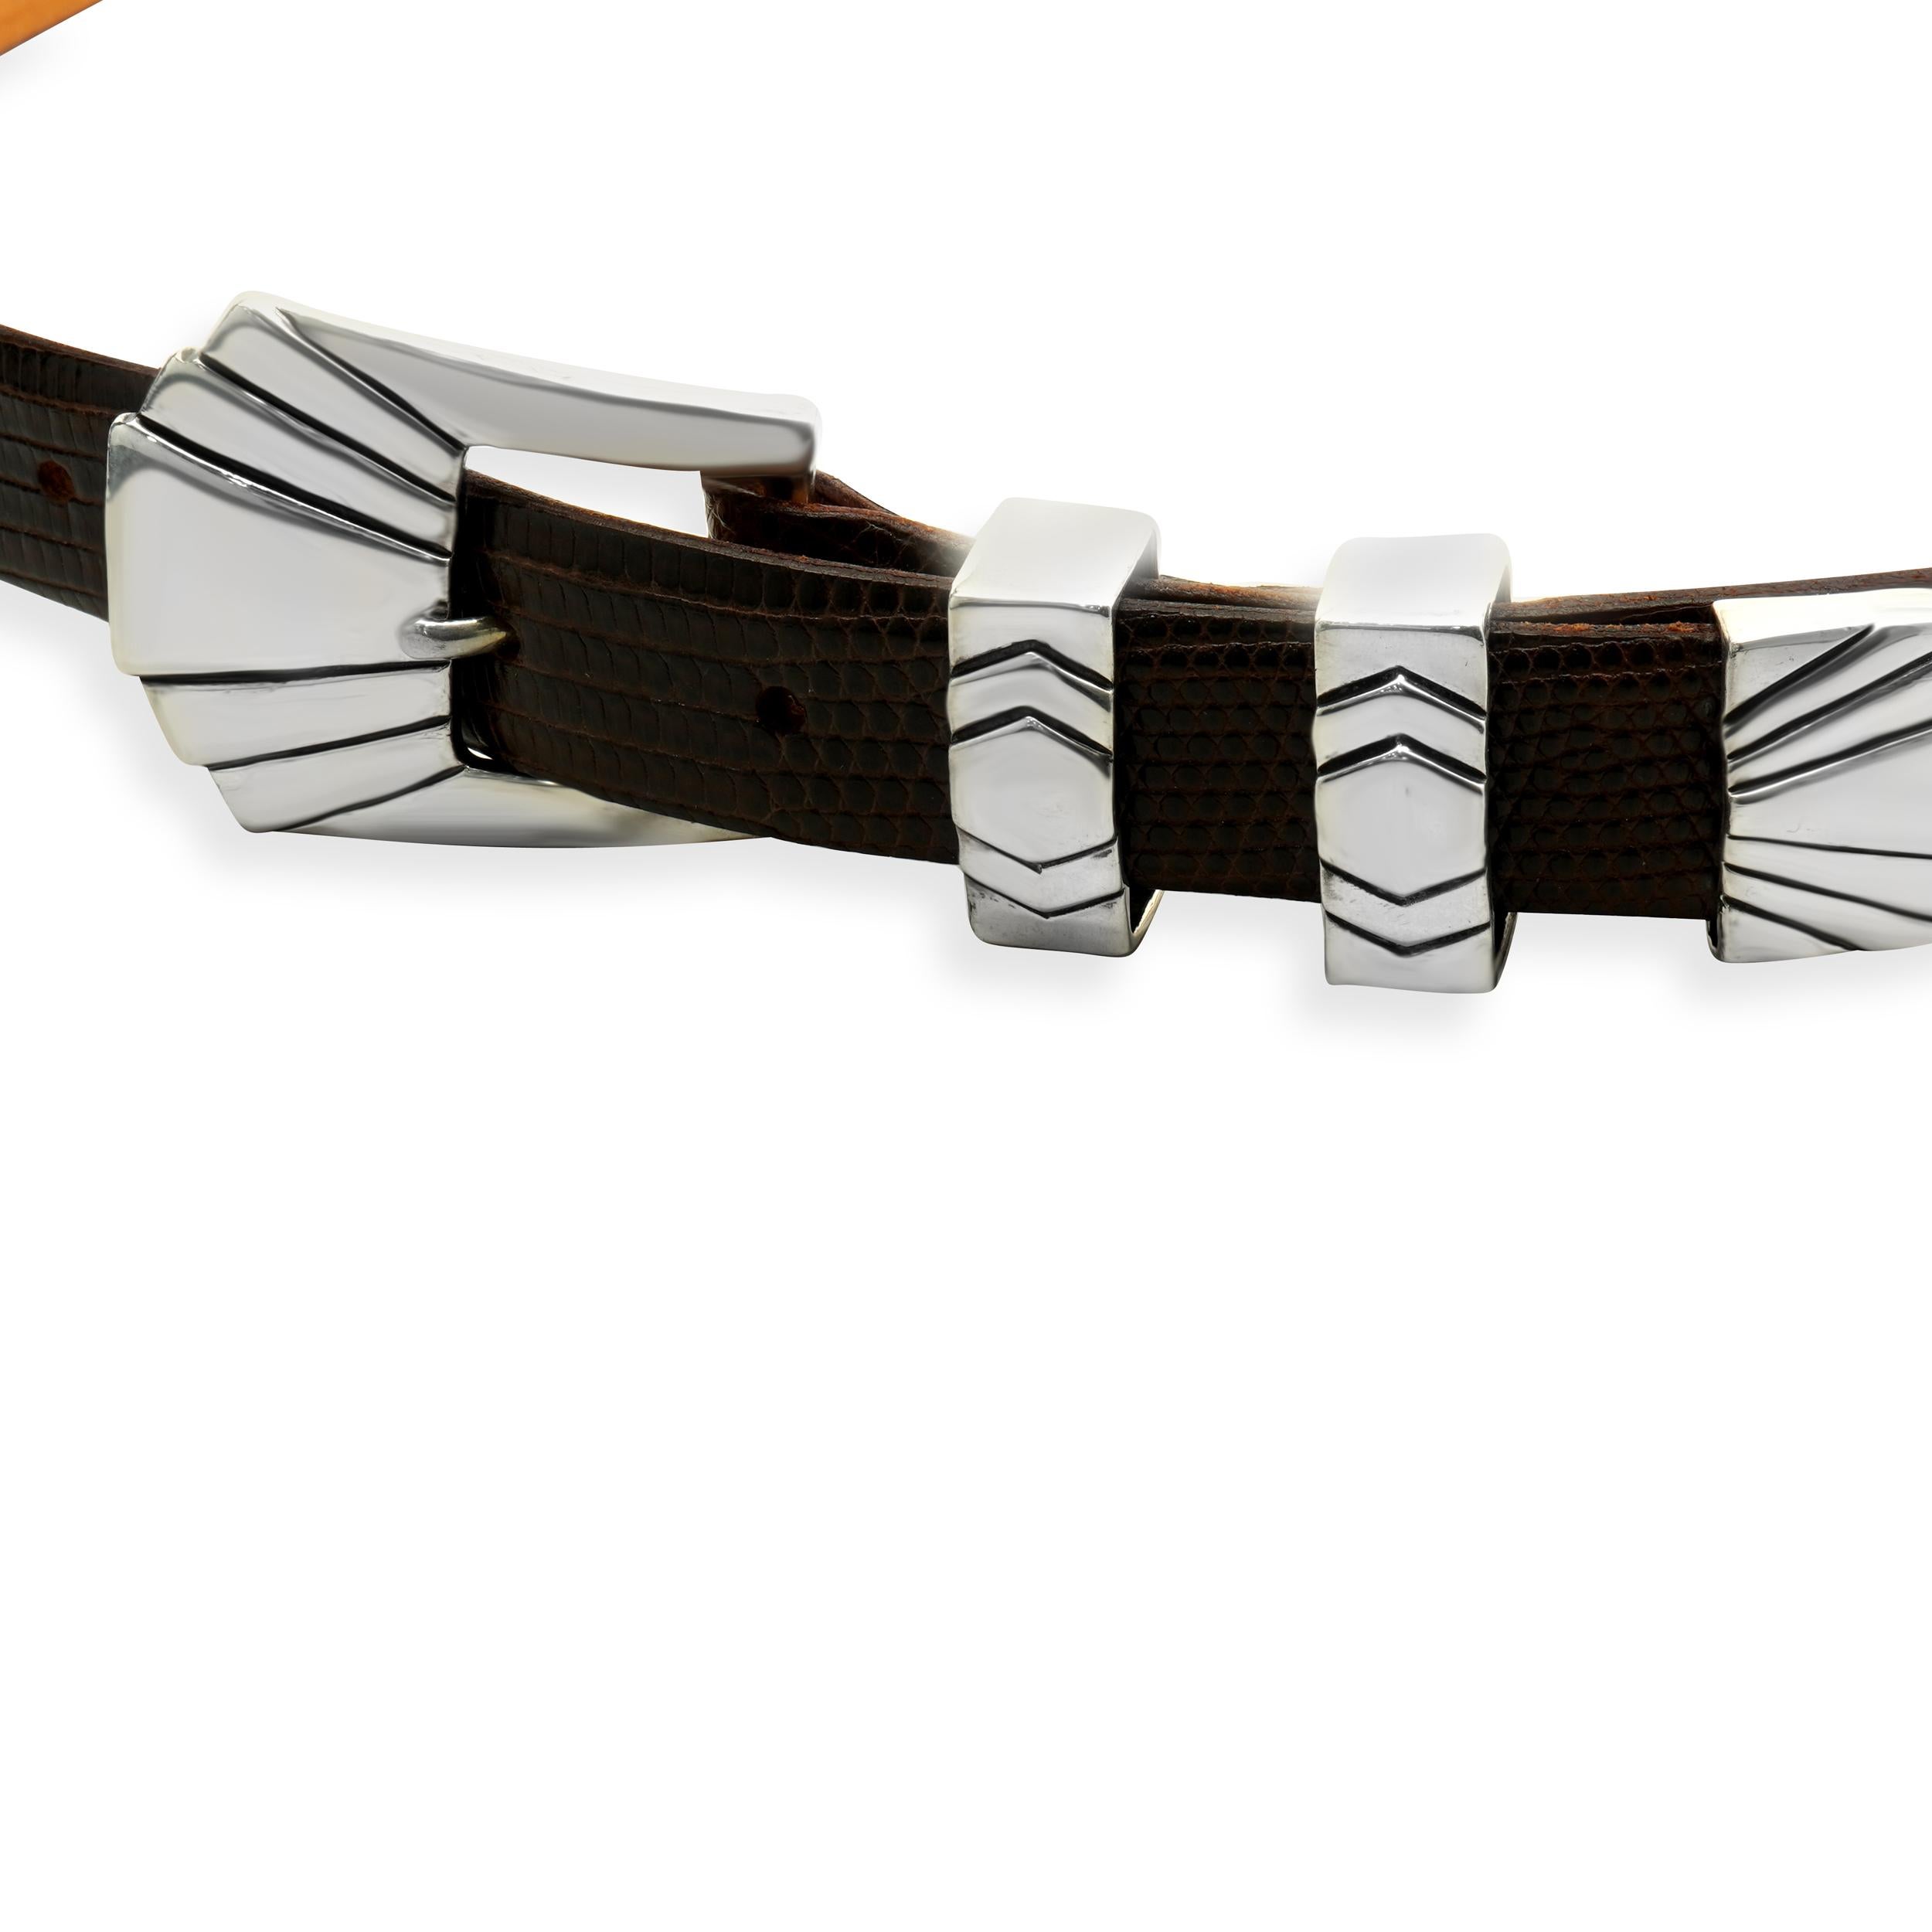 Designer: custom 
Material: sterling silver 
Dimensions: belt measures 36-inches
Weight: 29.50 grams
